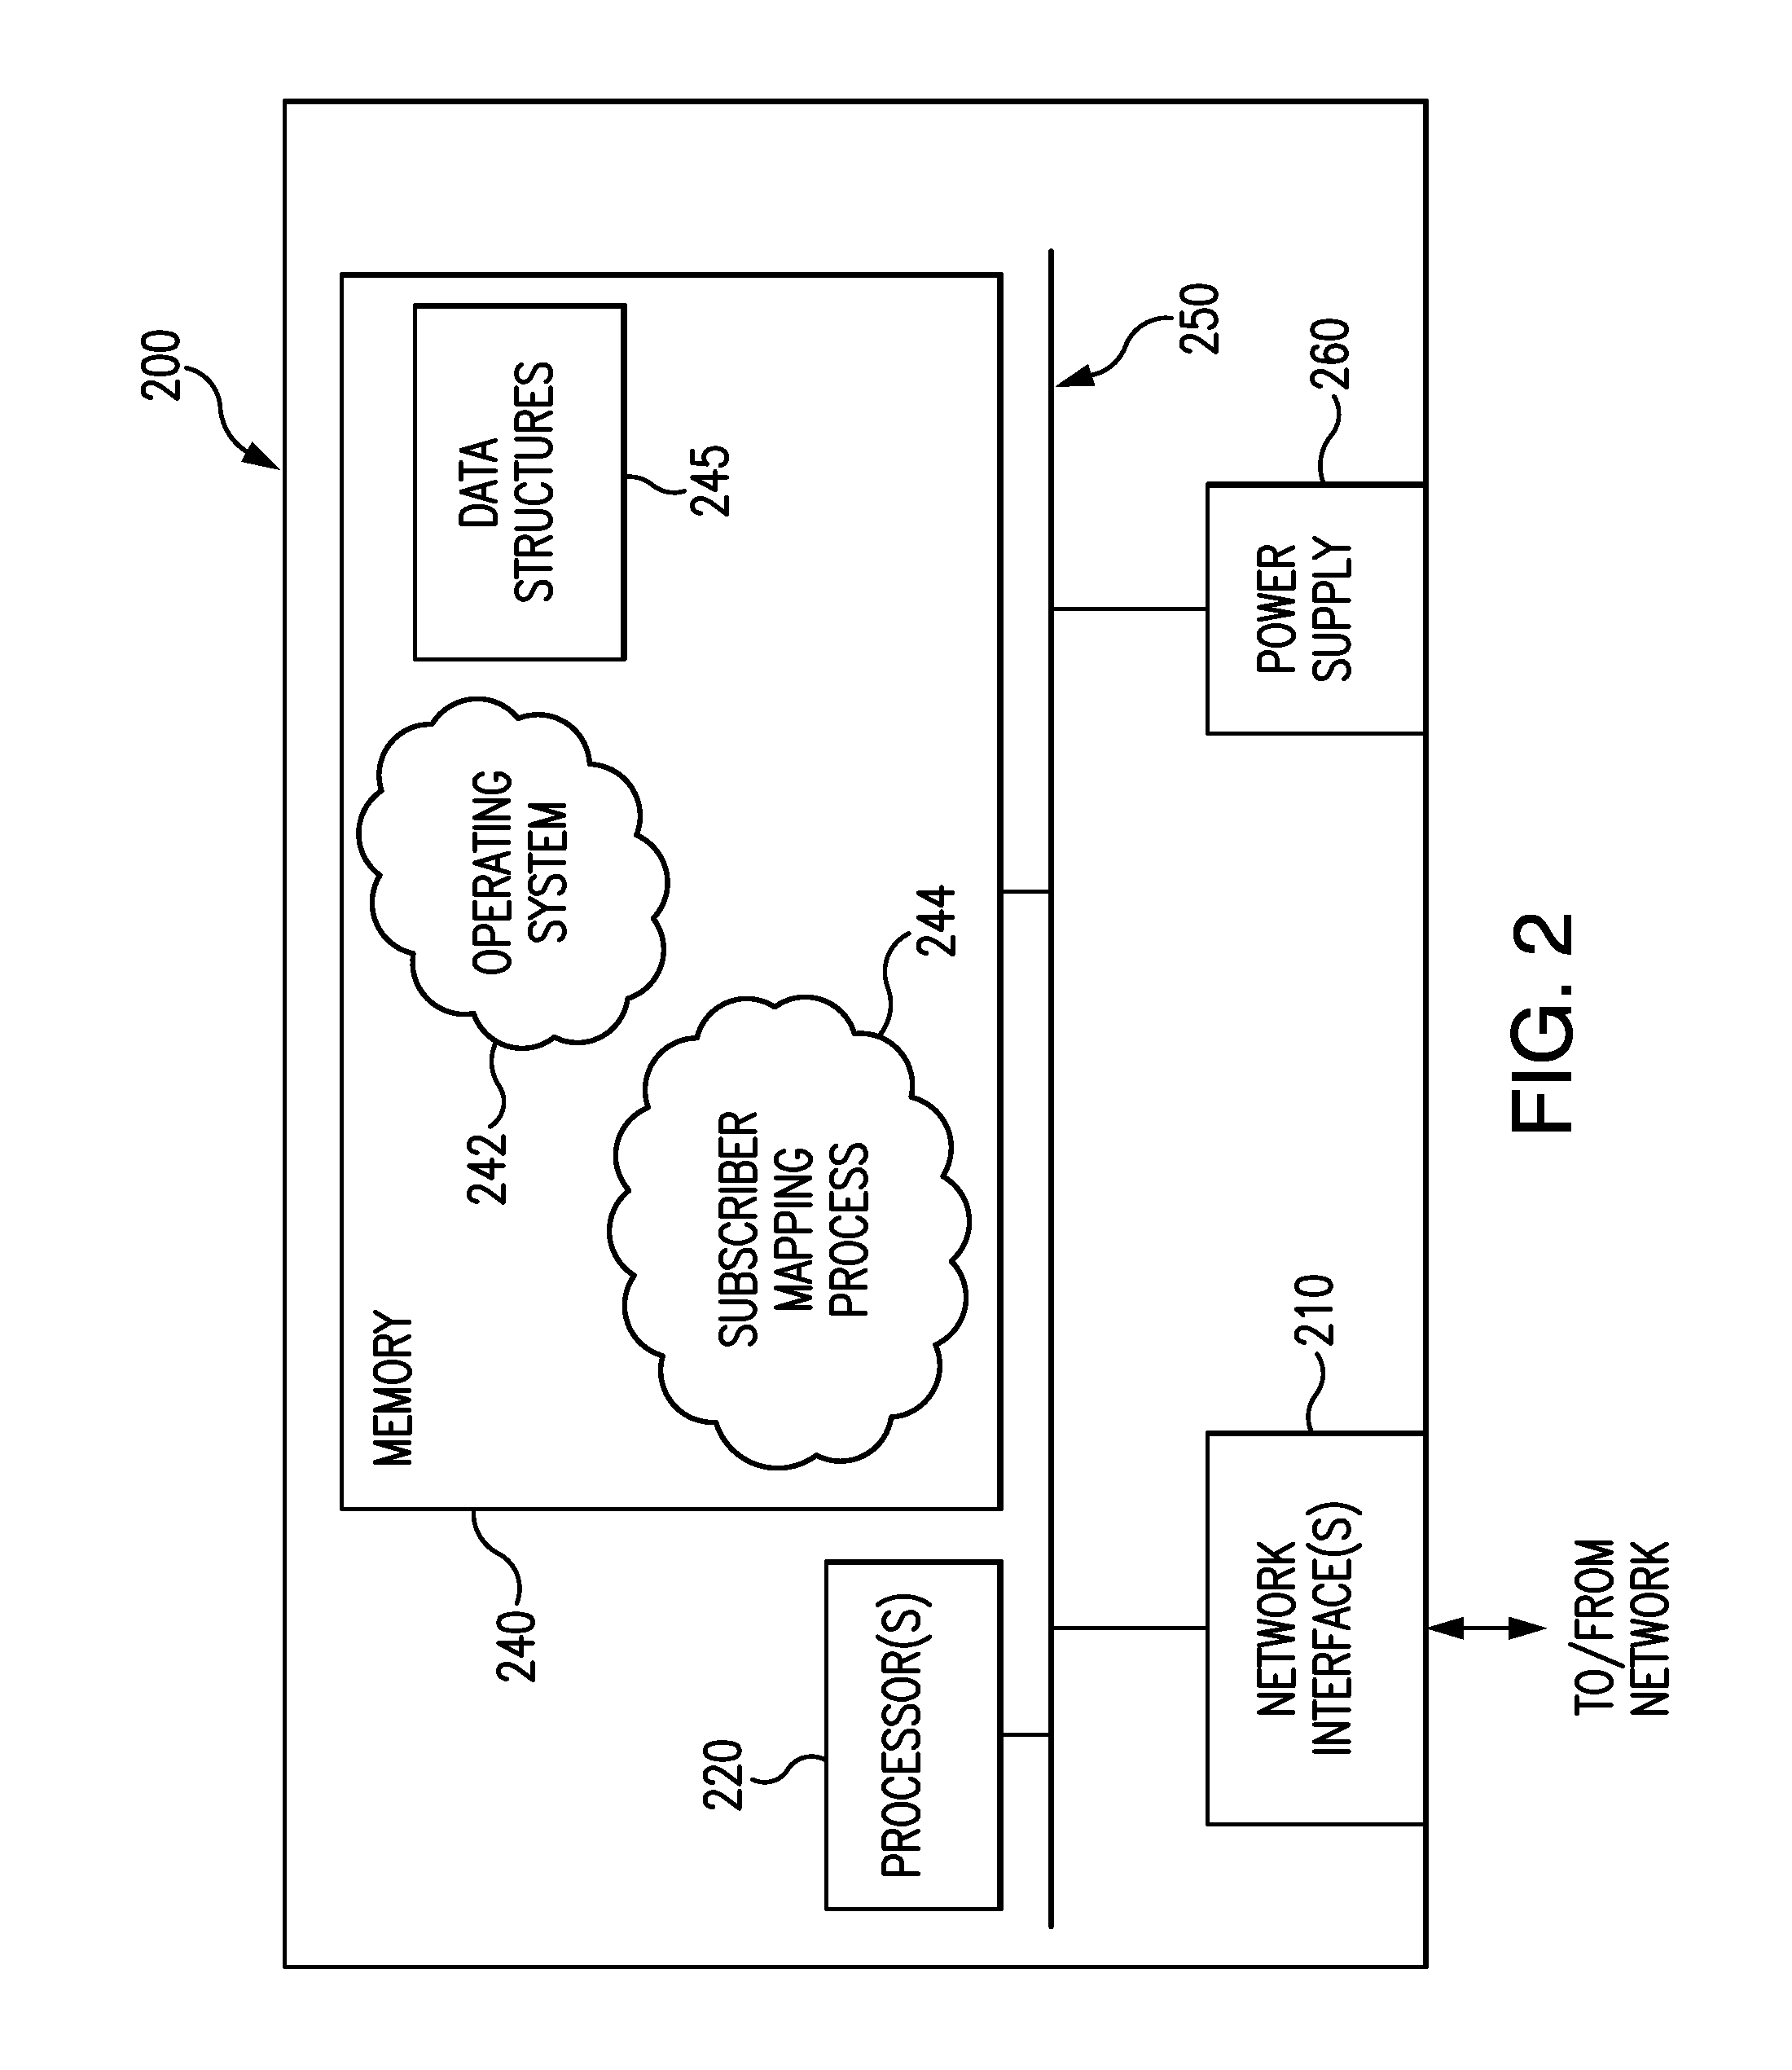 Systems, methods and devices for deriving subscriber and device identifiers in a communication network